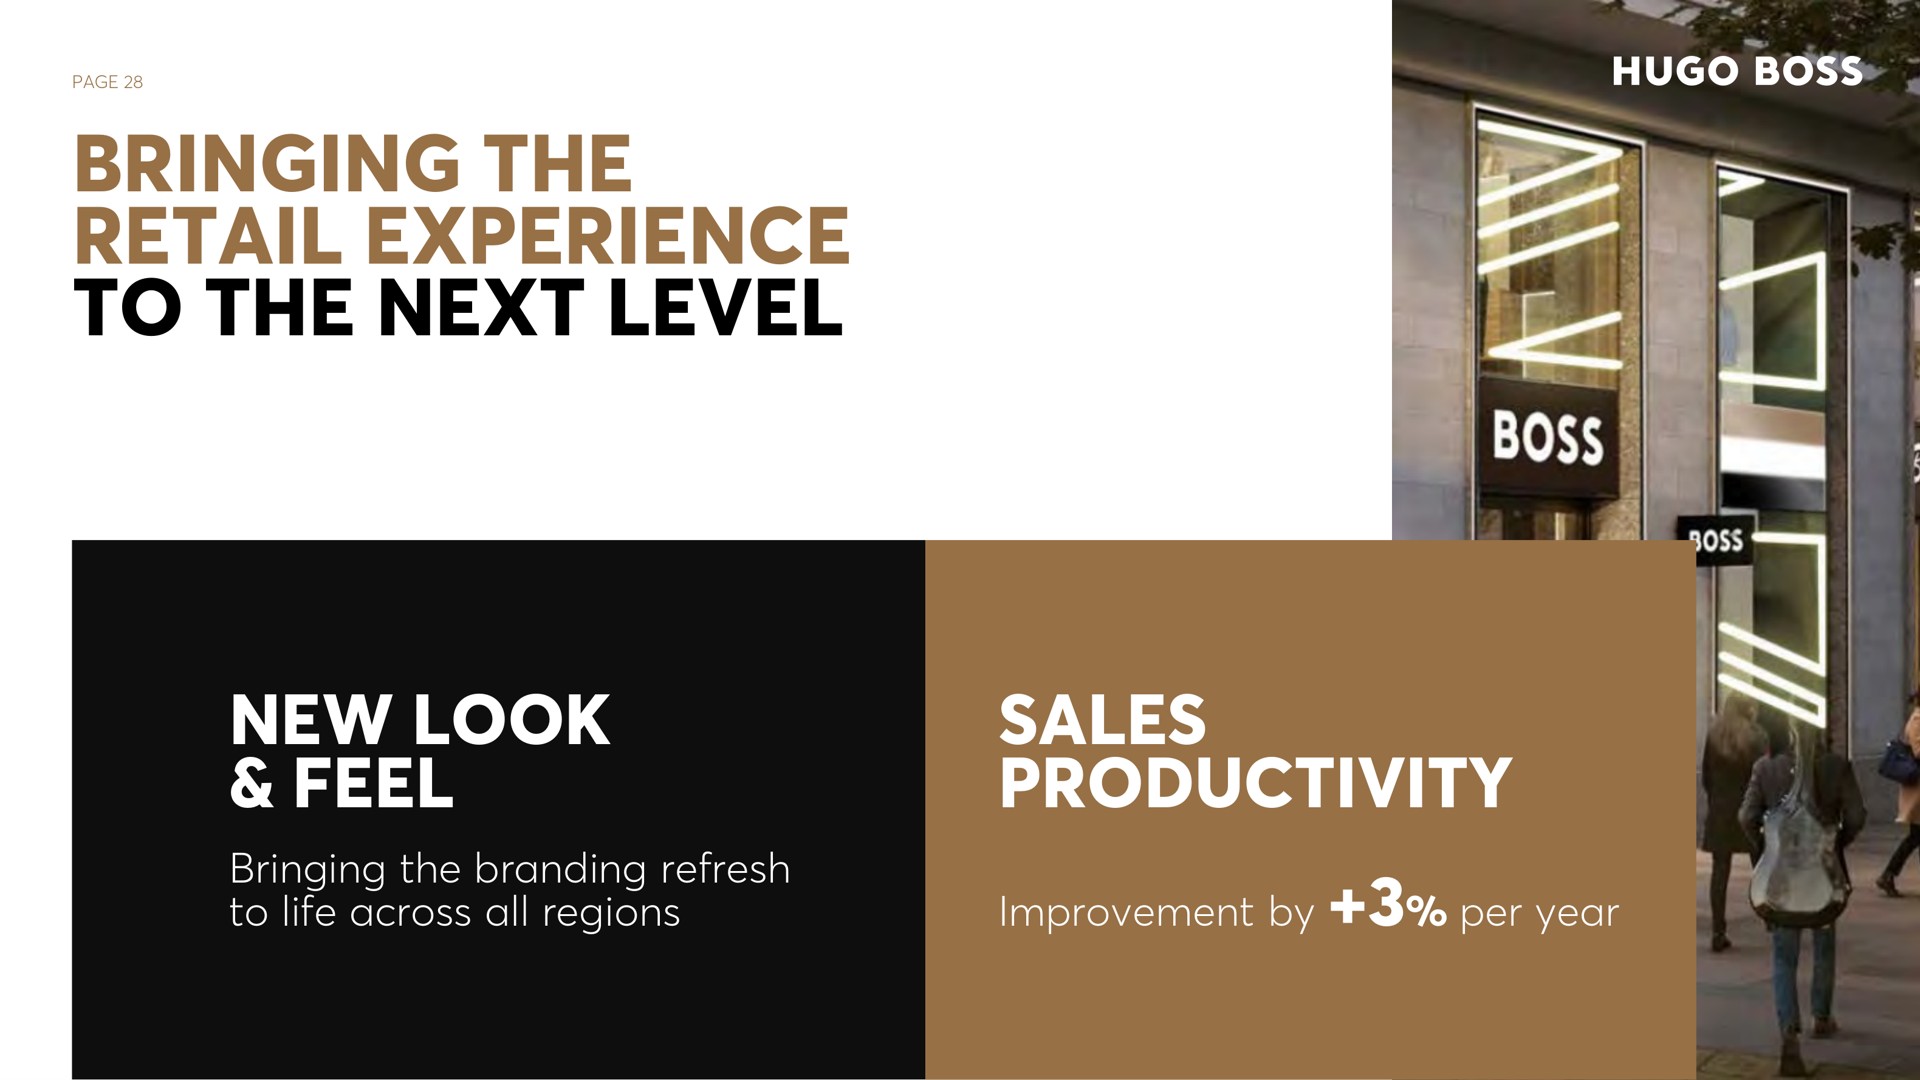 page bringing the retail experience to the next level new look feel bringing the branding refresh to life across all regions sales productivity improvement by per year | Hugo Boss